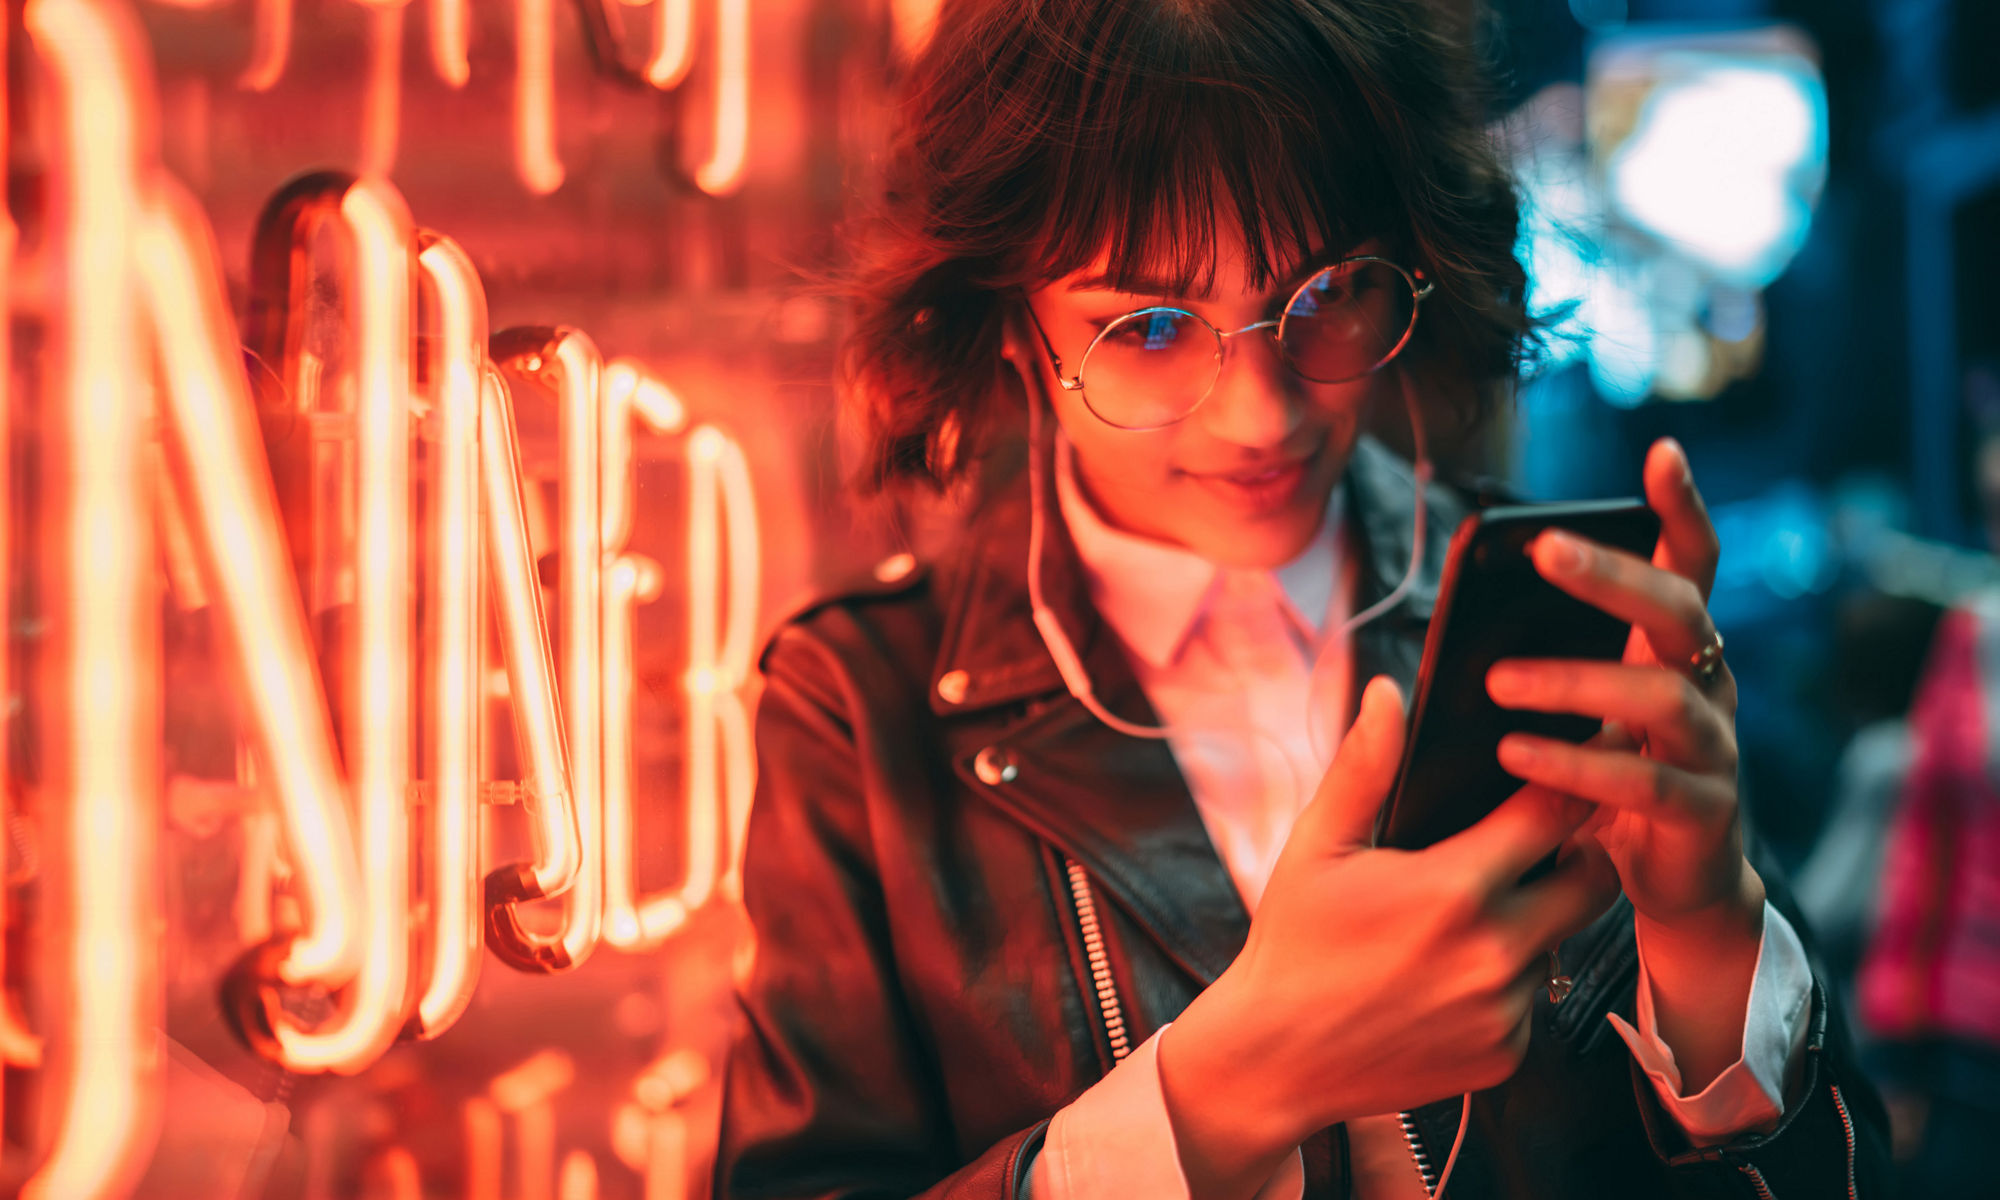 Woman standing in front of a neon sign looking at her phone, with headphones on, wearing a leather jacket.